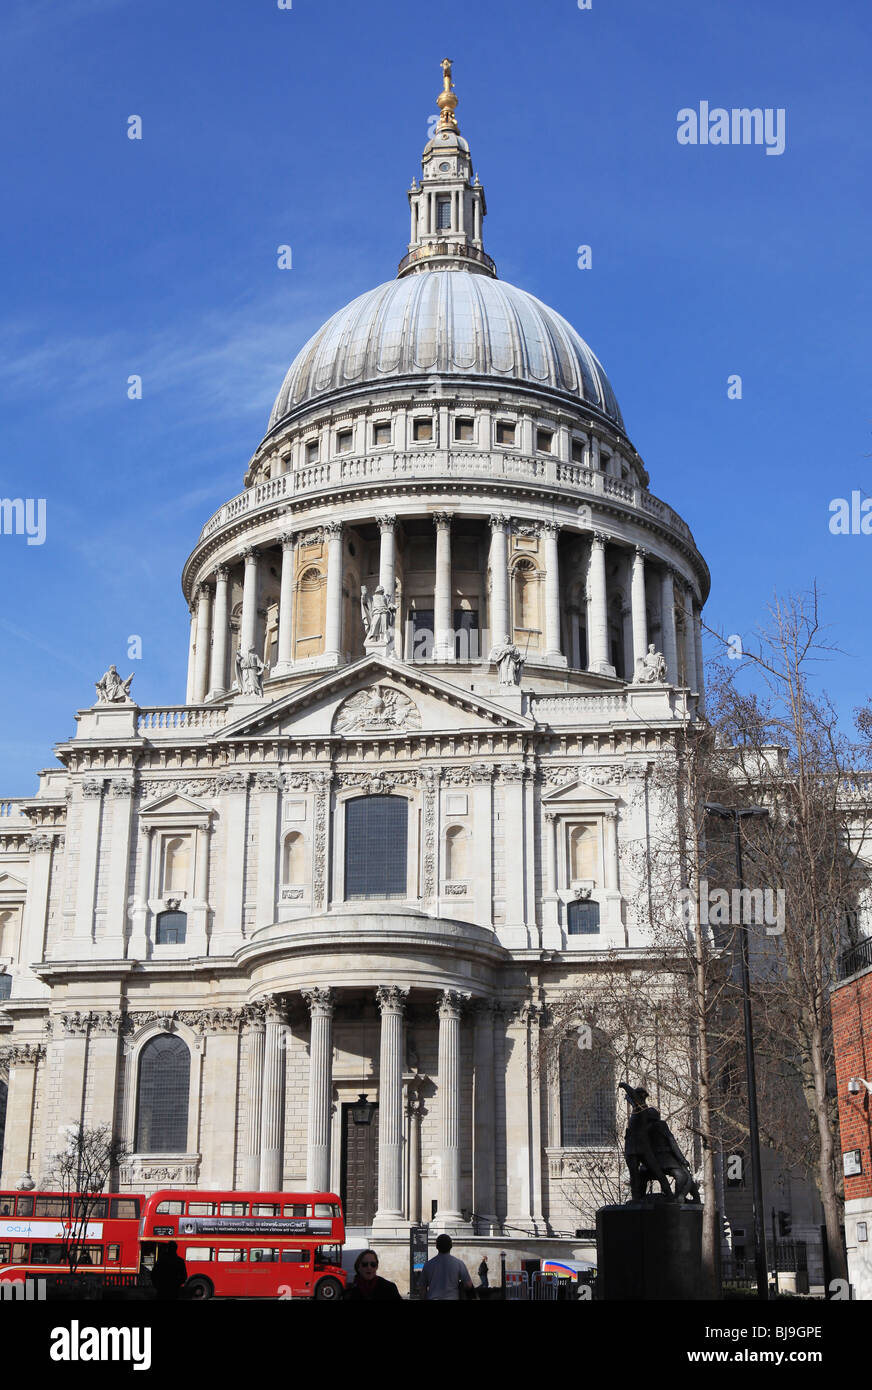 St Paul's cathedral,London.with a red double decker buses Stock Photo